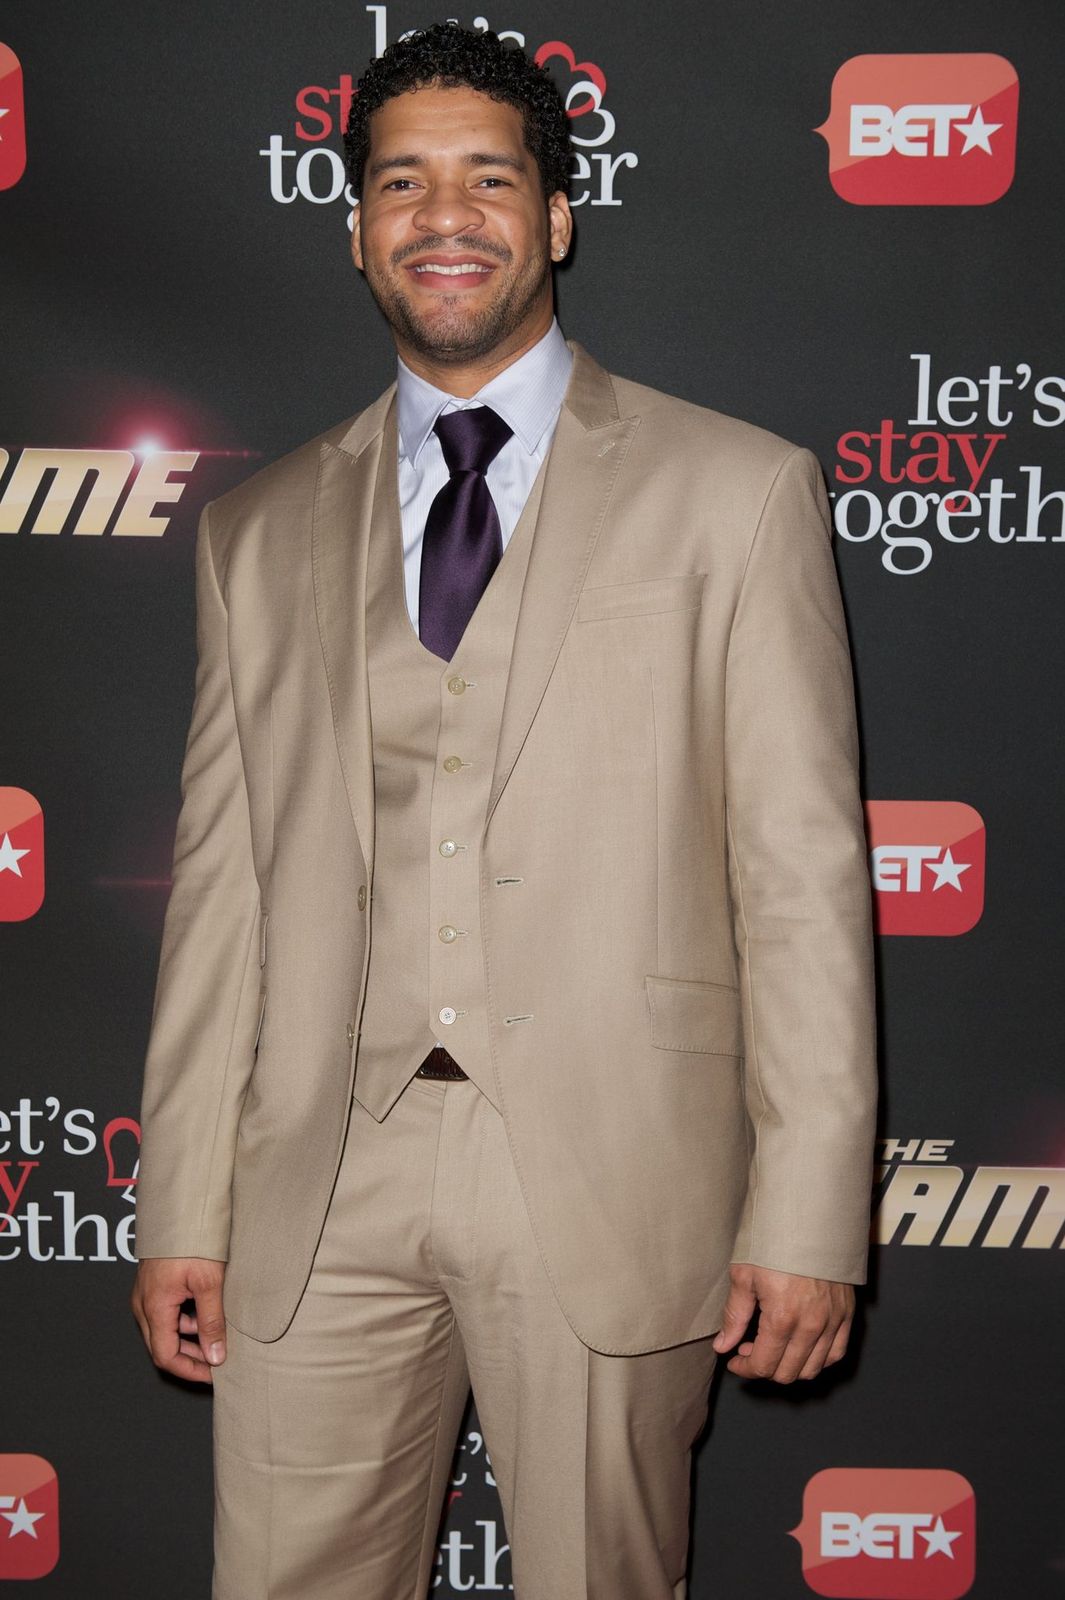 Bert Belasco on the red carpet for the premiere event for BET's "The Game" and "Let's Stay Together" on January 5, 2012, in Hollywood, California | Photo: Earl Gibson III/Getty Images